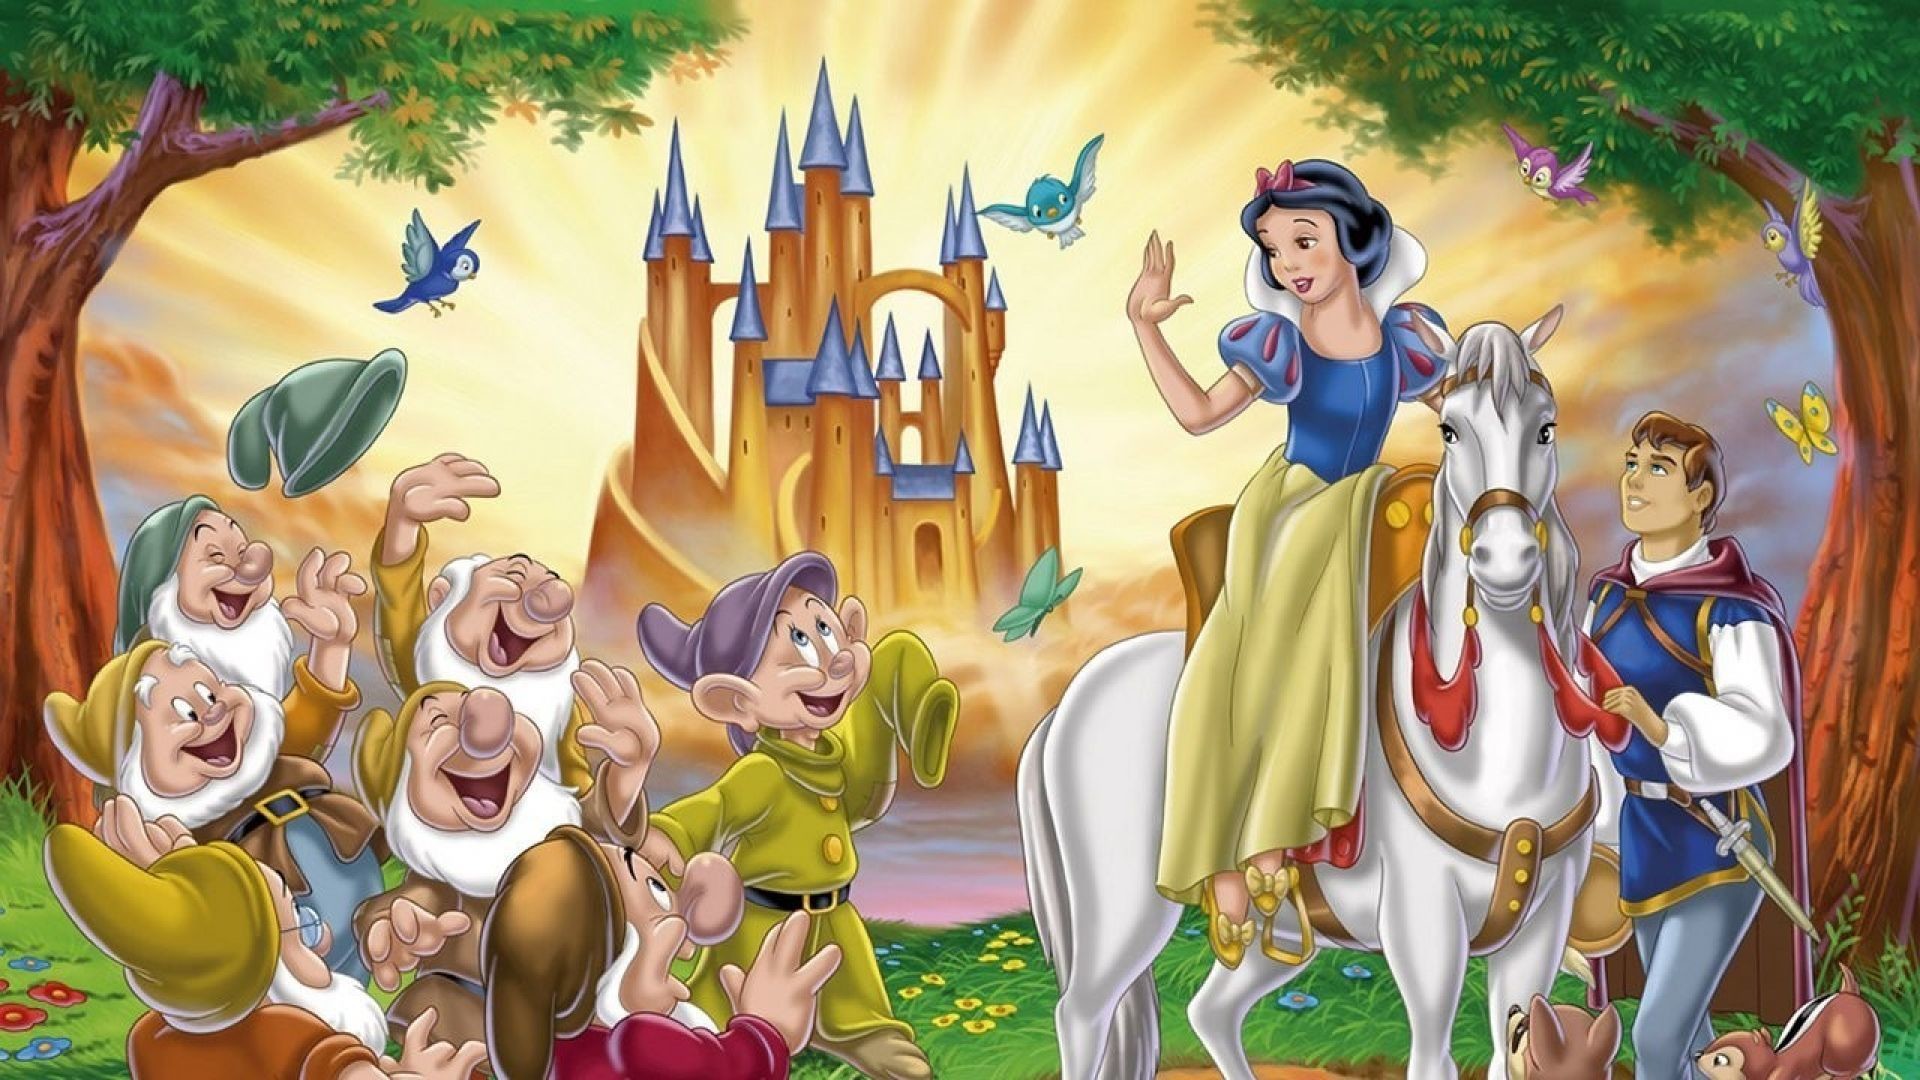 1920x1080 Snow White and the Seven Dwarfs Image#2